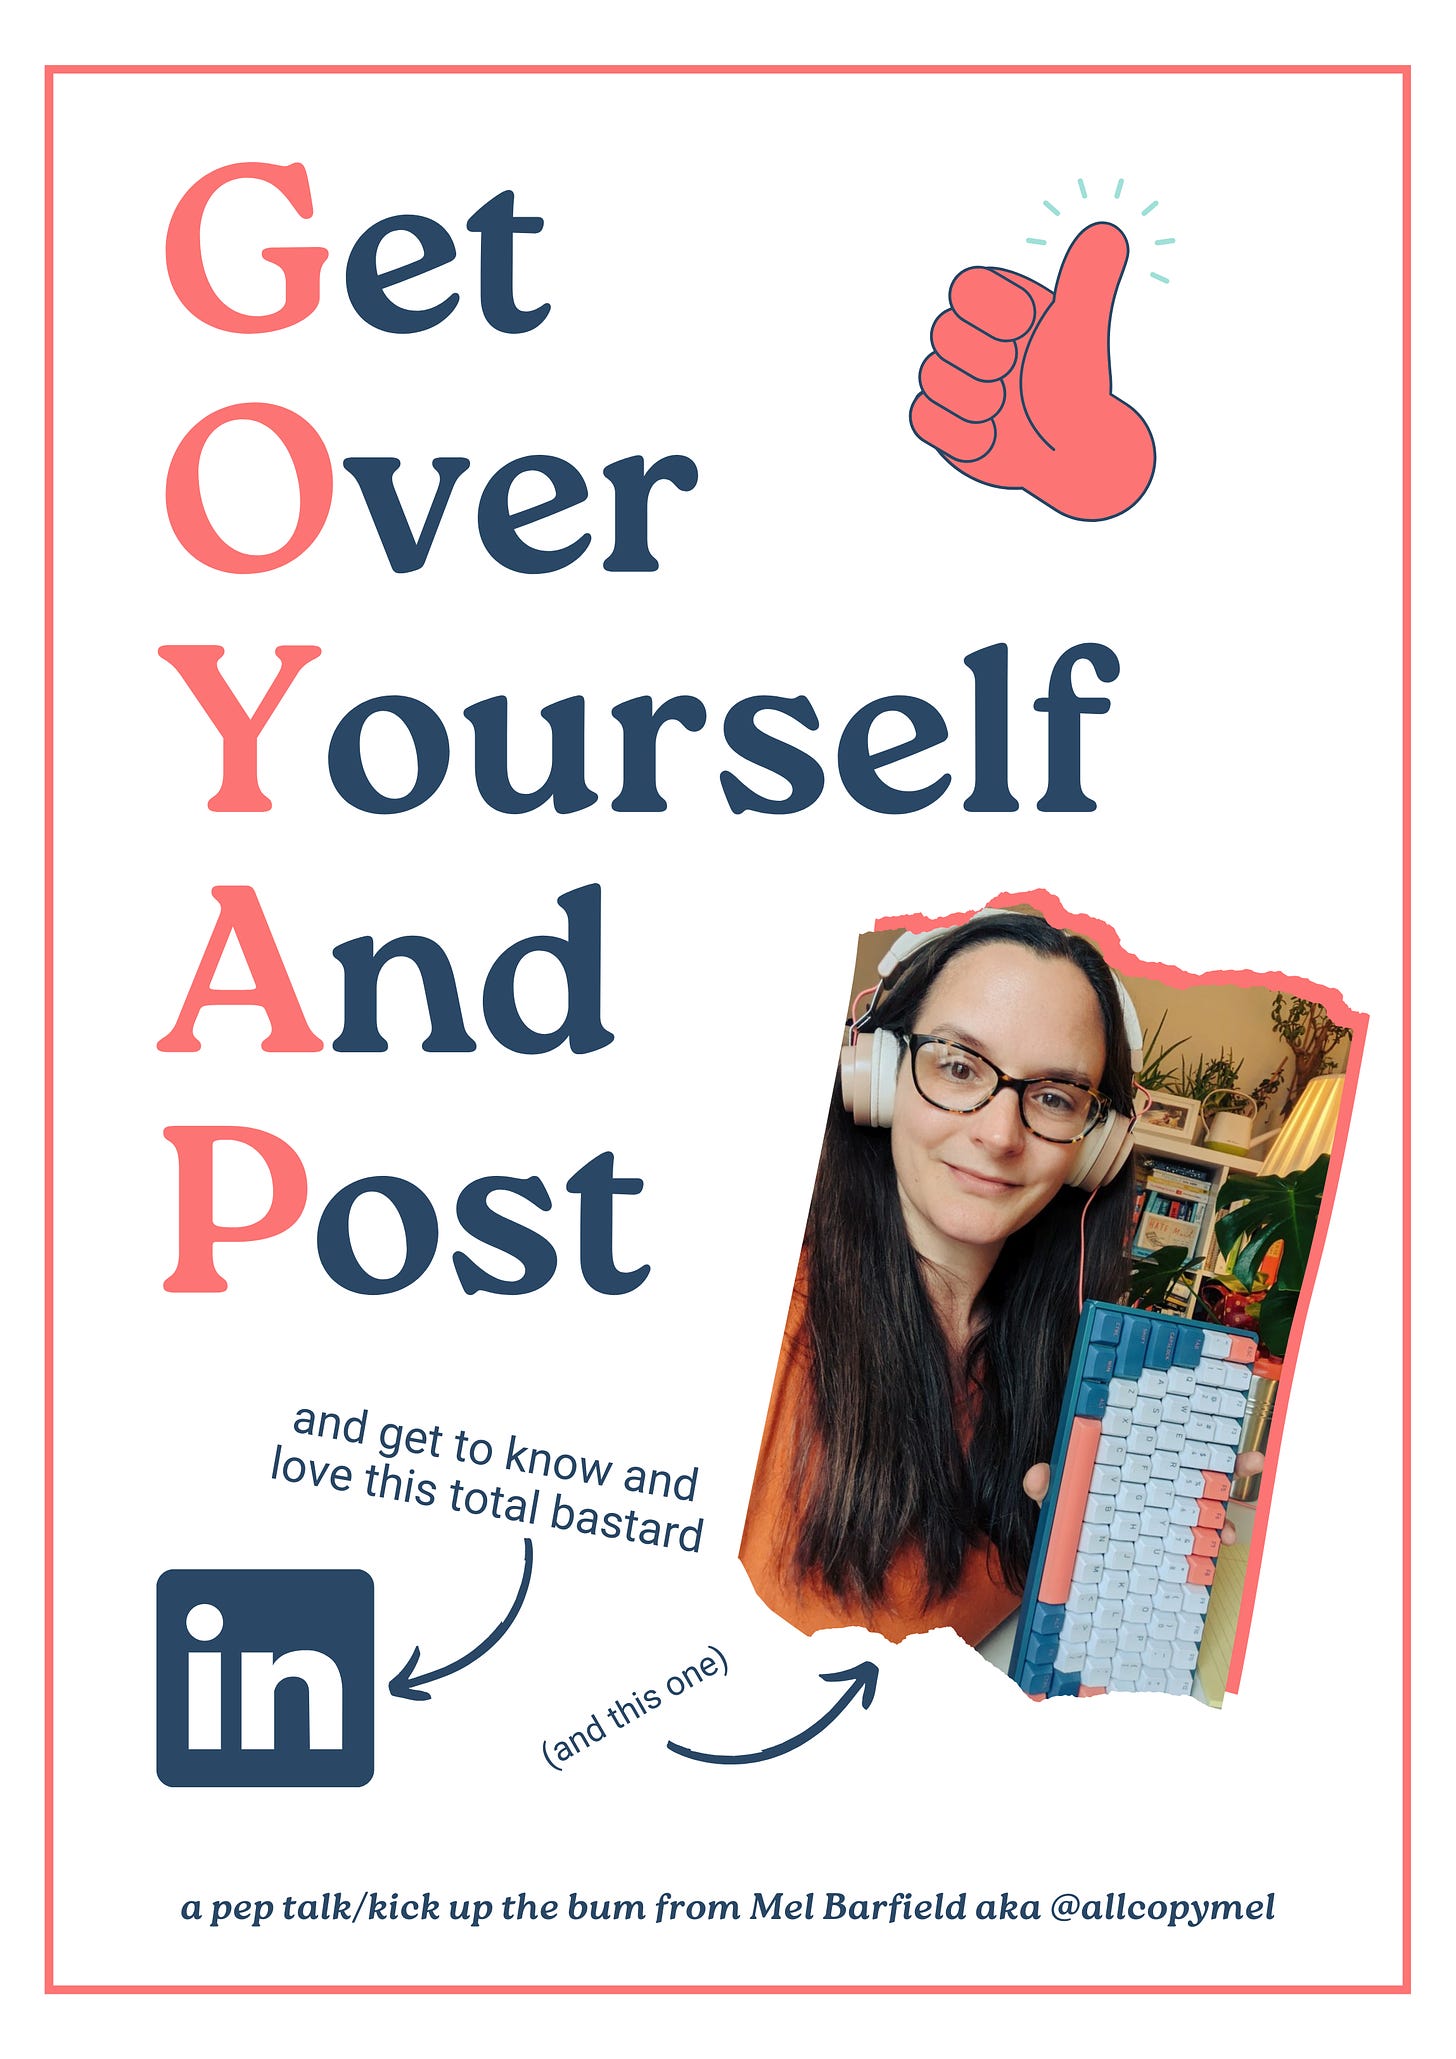 A white cover page that says "Get Over Yourself And Post - get to know and love this total bastard LinkedIn an this one (me). A pep talk/kick up the bum from Mel Barfield aka @allcopymel